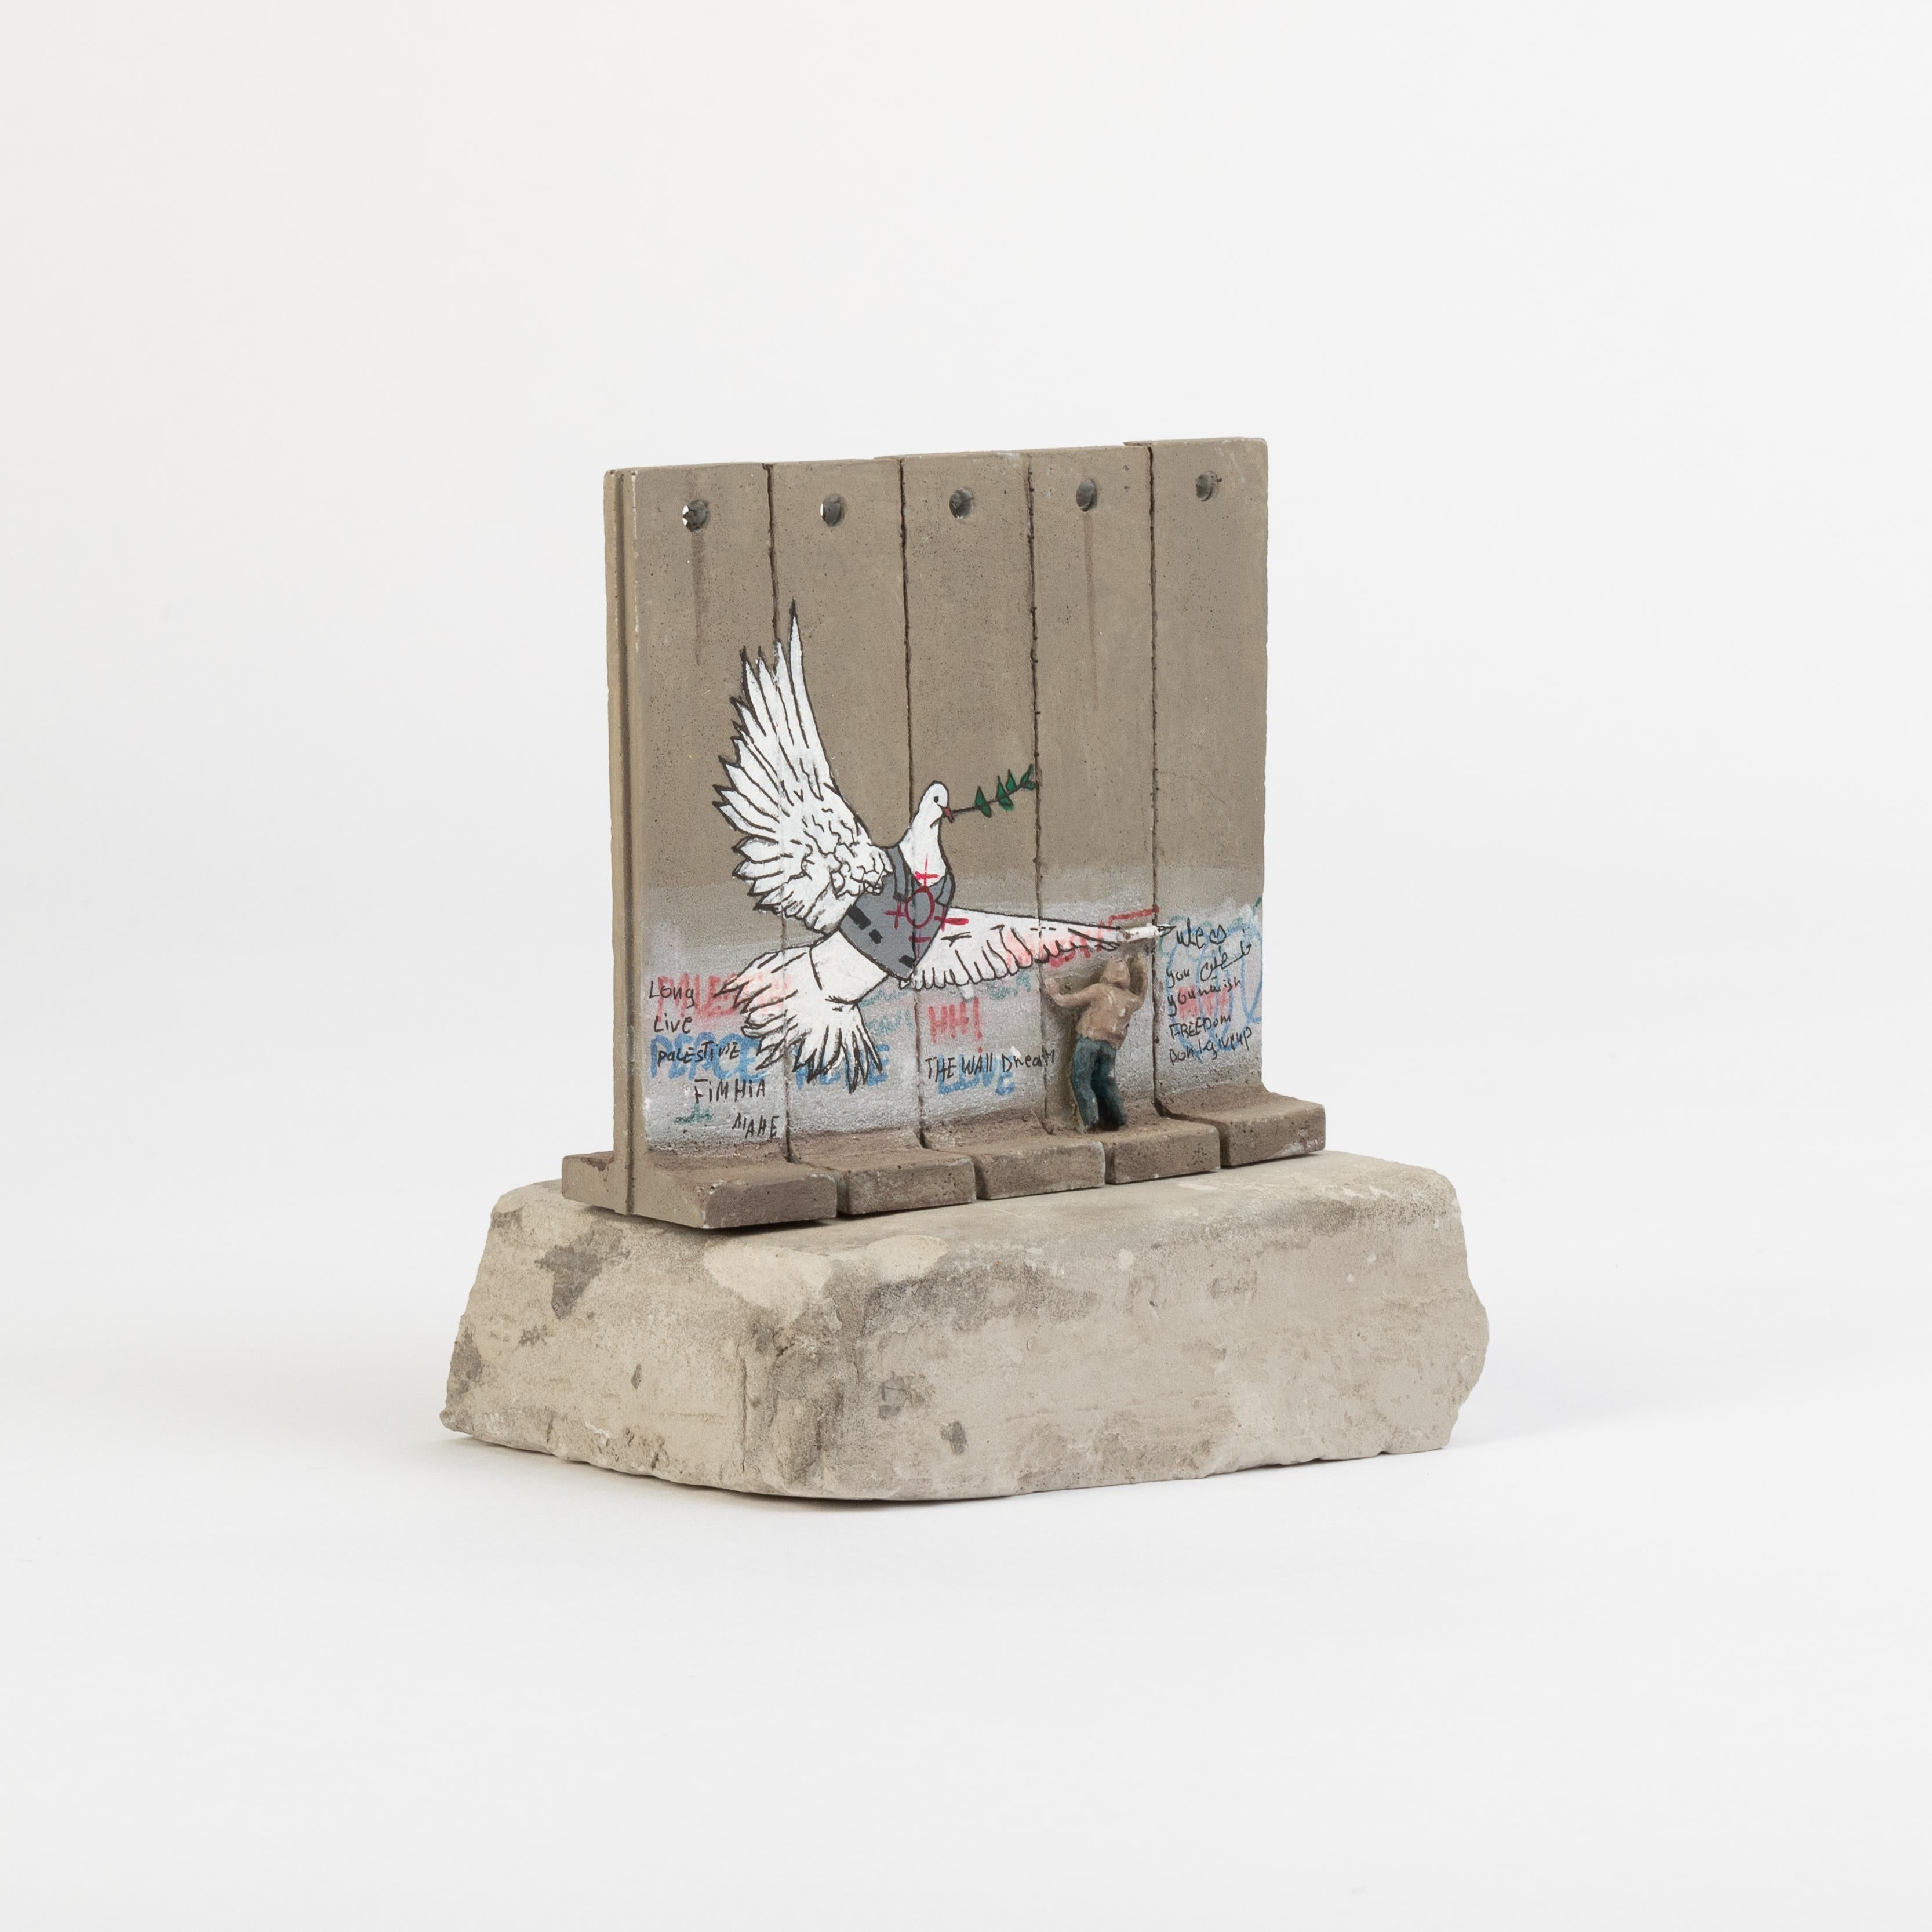 Miniature concrete souvenir sculpture, hand-painted by local artists
Open edition.
New, as issued; some imperfections may exist given the nature of the material
Unsigned and marked with a unique reference number on the underside
Issued with a WOH